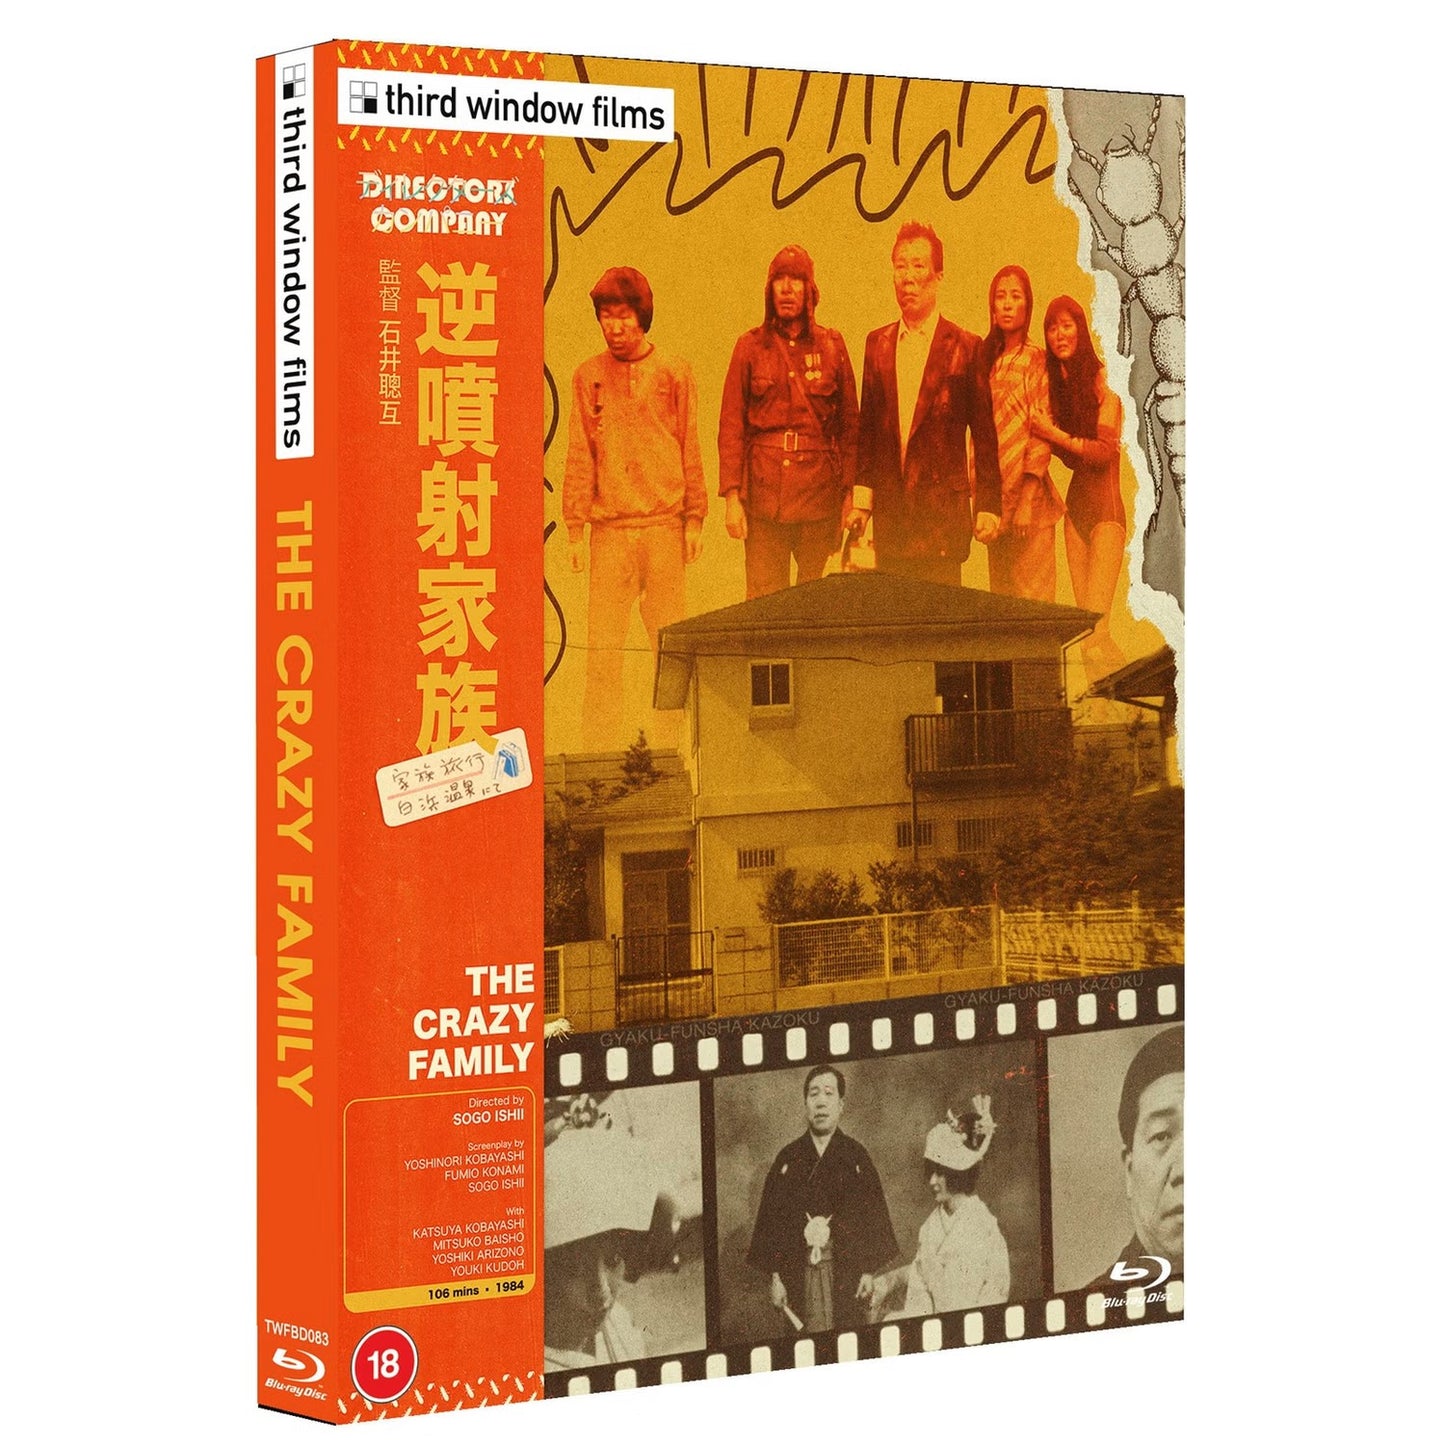 The Crazy Family Blu-ray with Slipcover (Third Window Films/Region Free)